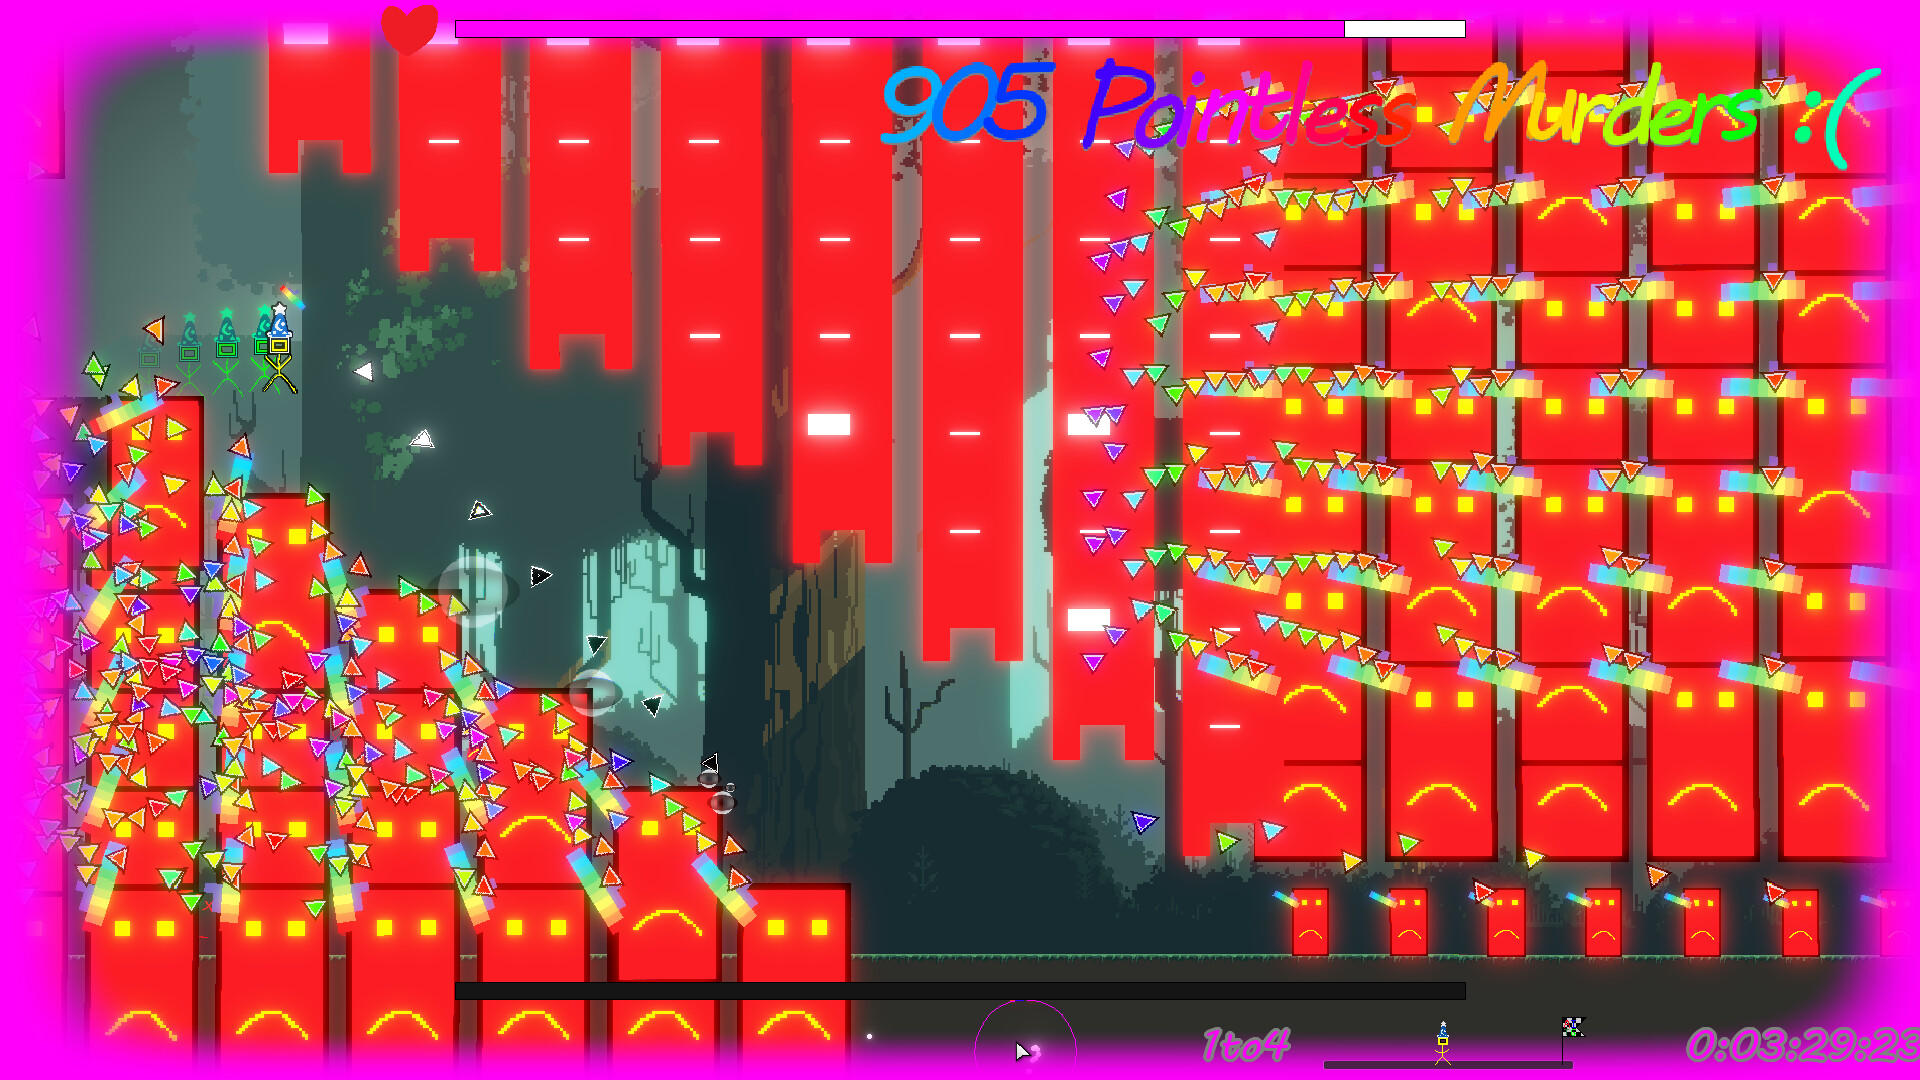 Screenshot of A2C:Ayry seems to be playtesting a 2D runner shooter from Cci